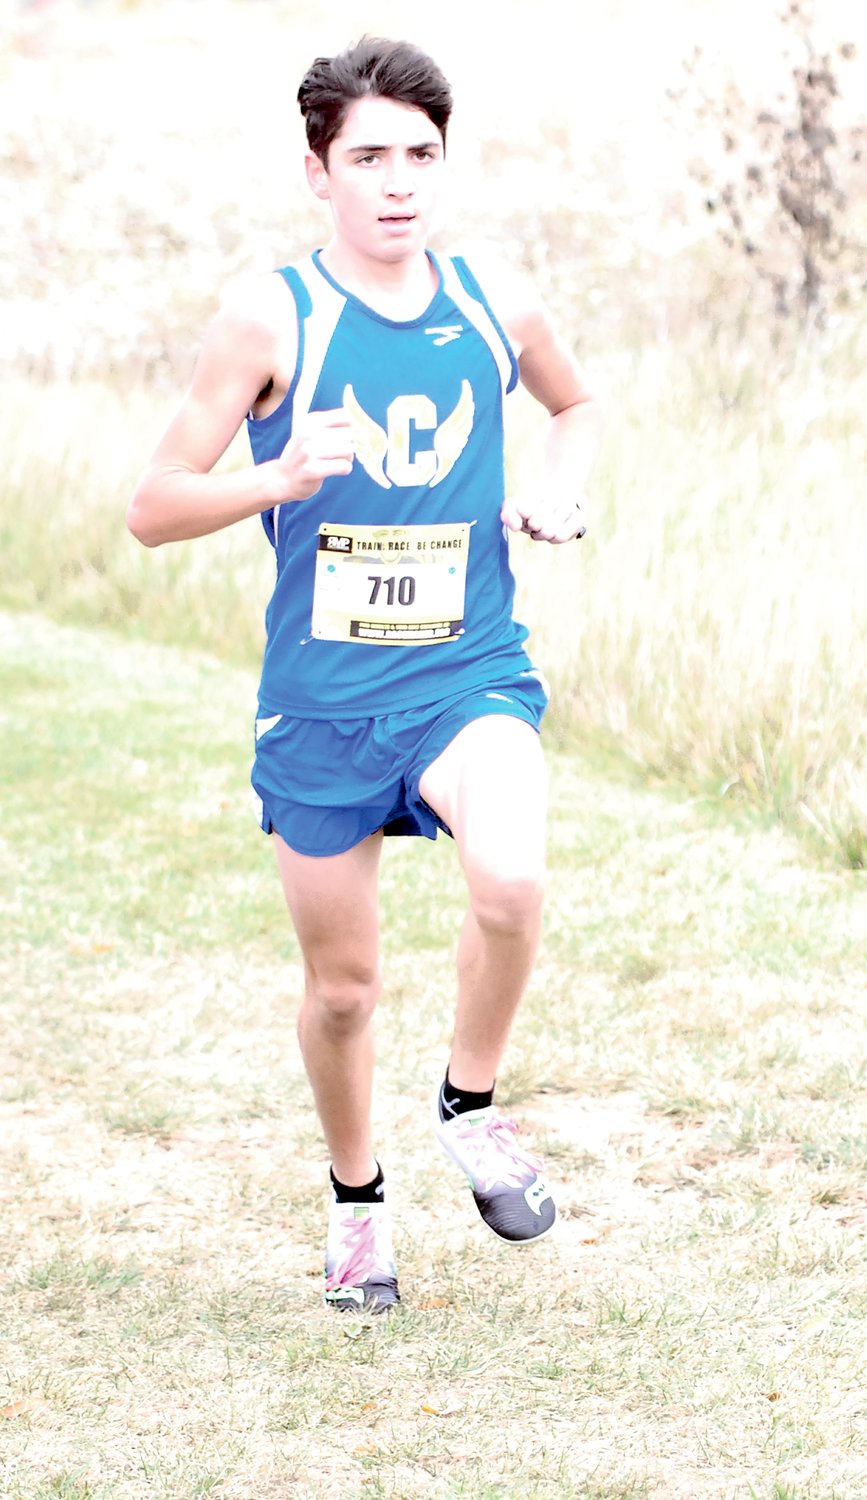 Crawfordsville freshman Ryan Miller placed 23rd at the IHSAA Sectional in a time of 18:19.